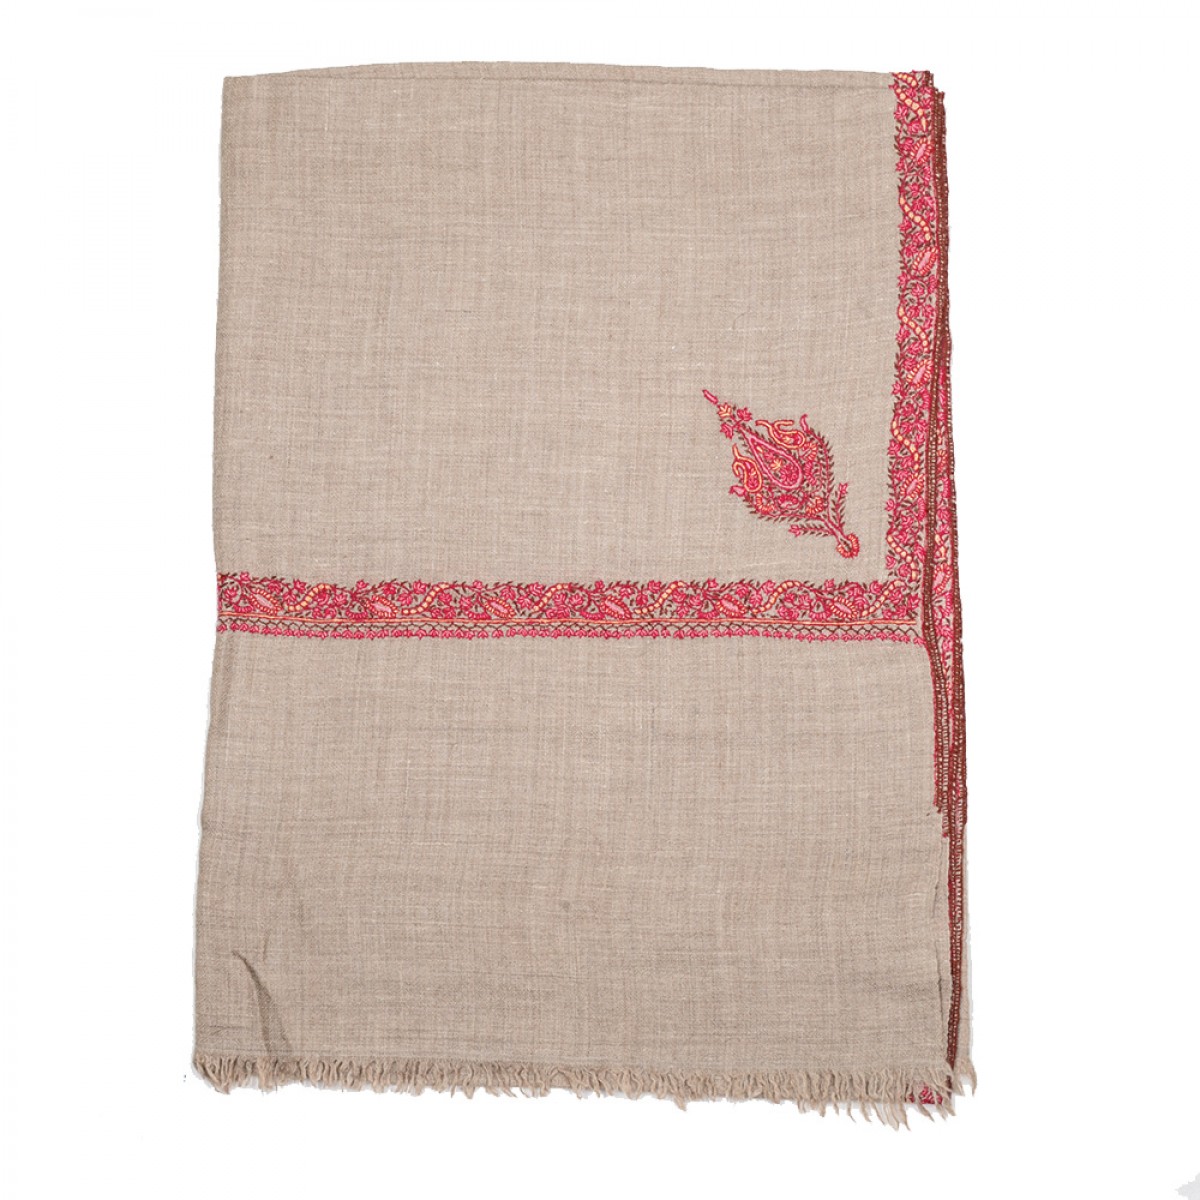 Embroidered Pashmina Stole - Natural & Dark Red